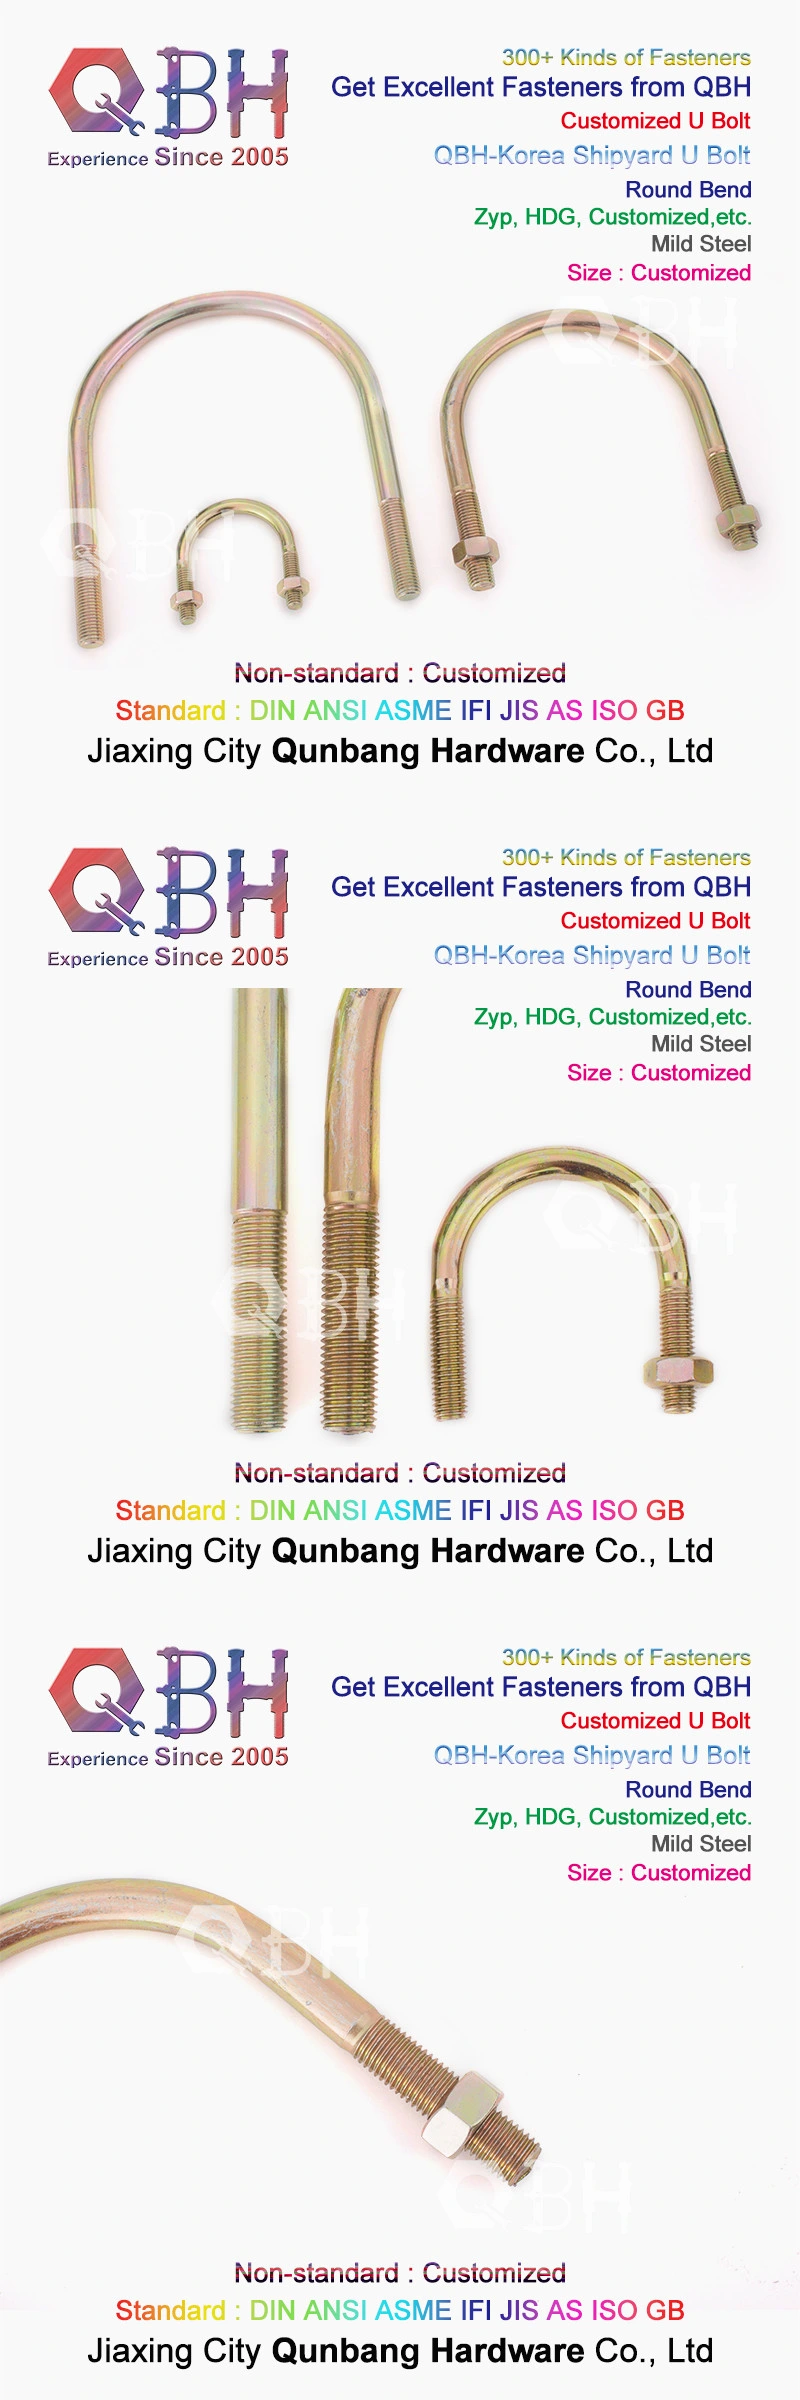 Qbh 300+ Shipyard Ship Tunnage Building Construction Structure Solar Panel Round Square Bend Pipe Fitting Spring Stainless Carbon Steel Zinc Plated U Stud Bolt